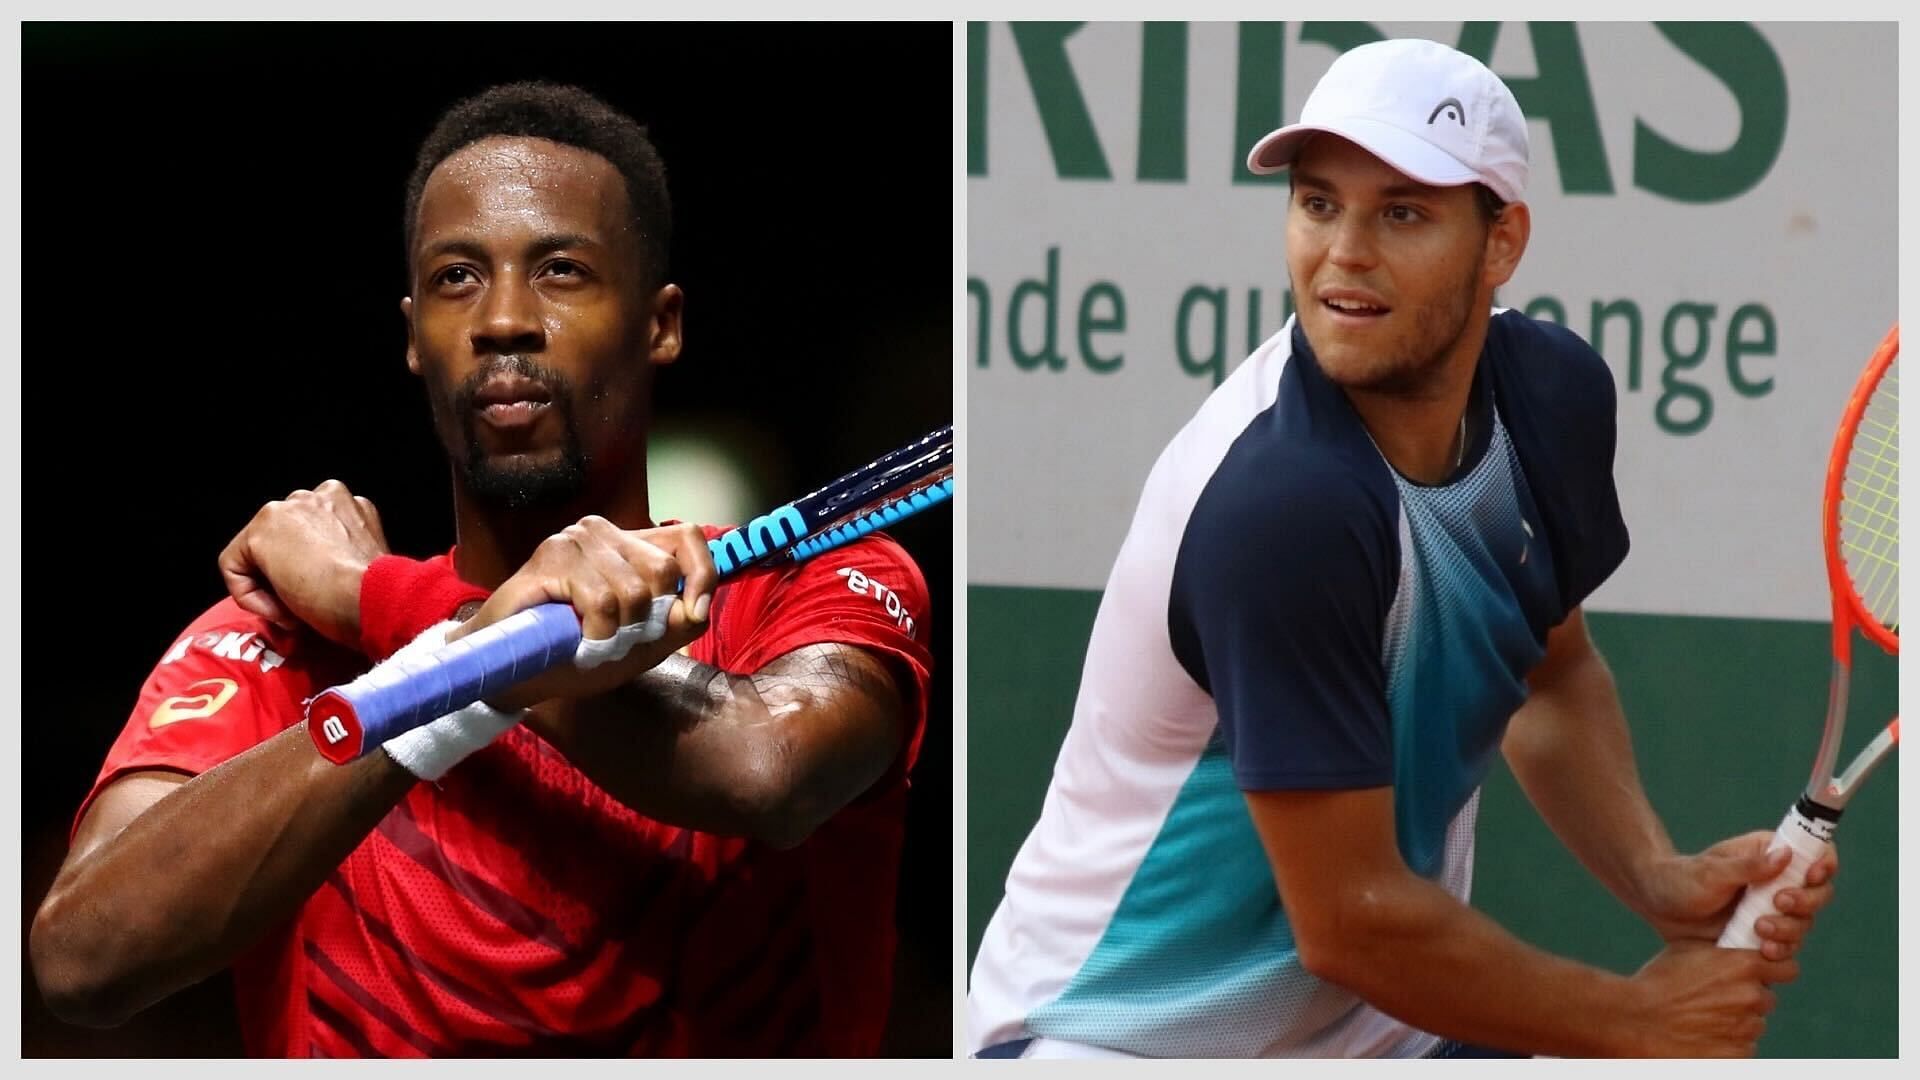 Gael Monfils vs Pavel Kotov is the final at the 2023 Stockholm Open.